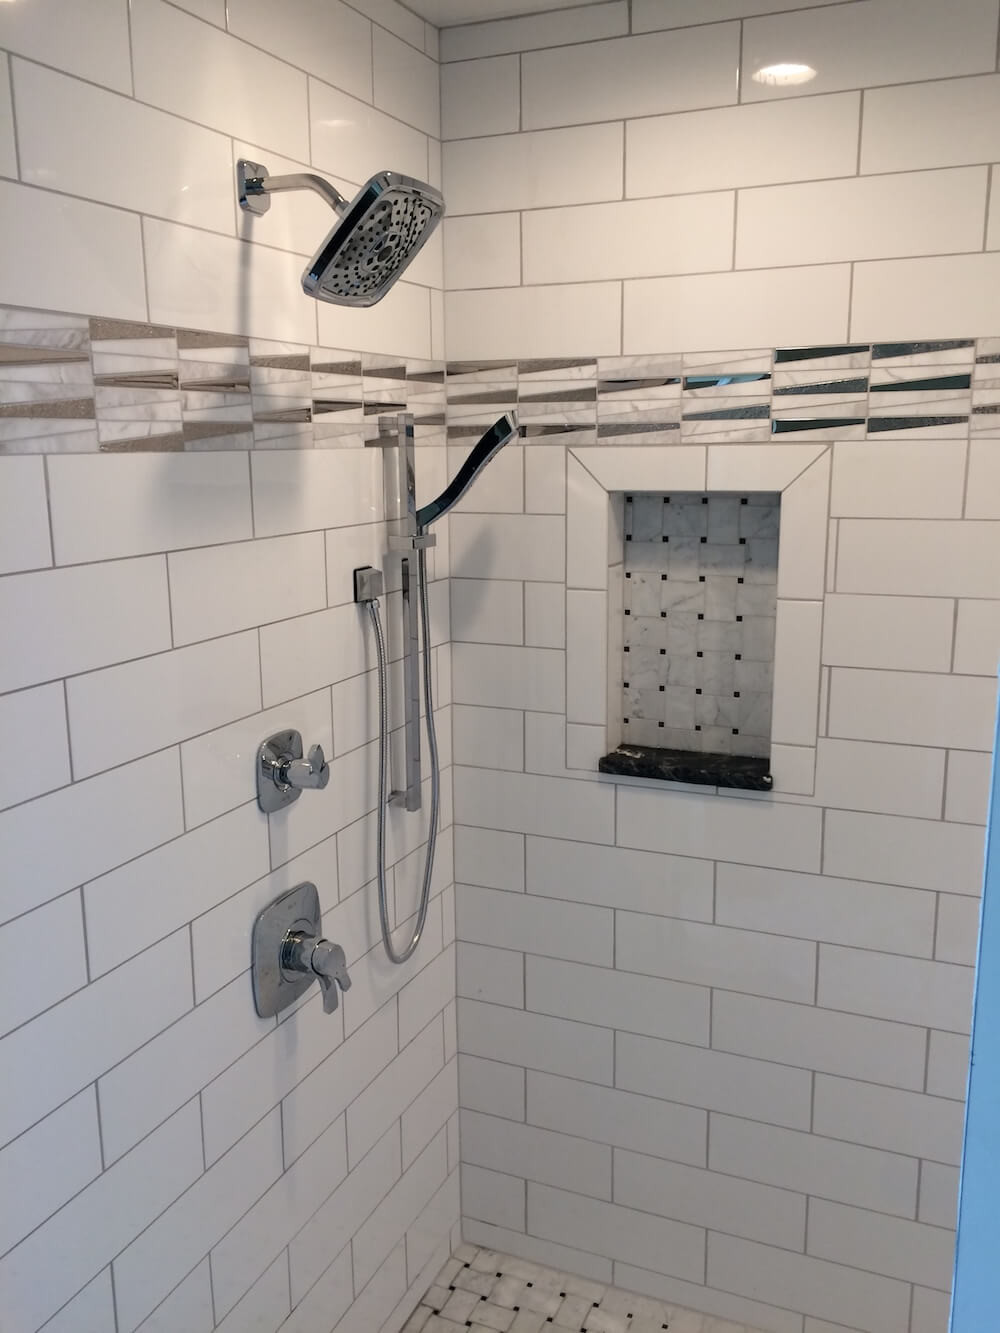 Regrouting Bathroom Tiles
 2020 Regrouting Shower Tile Cost